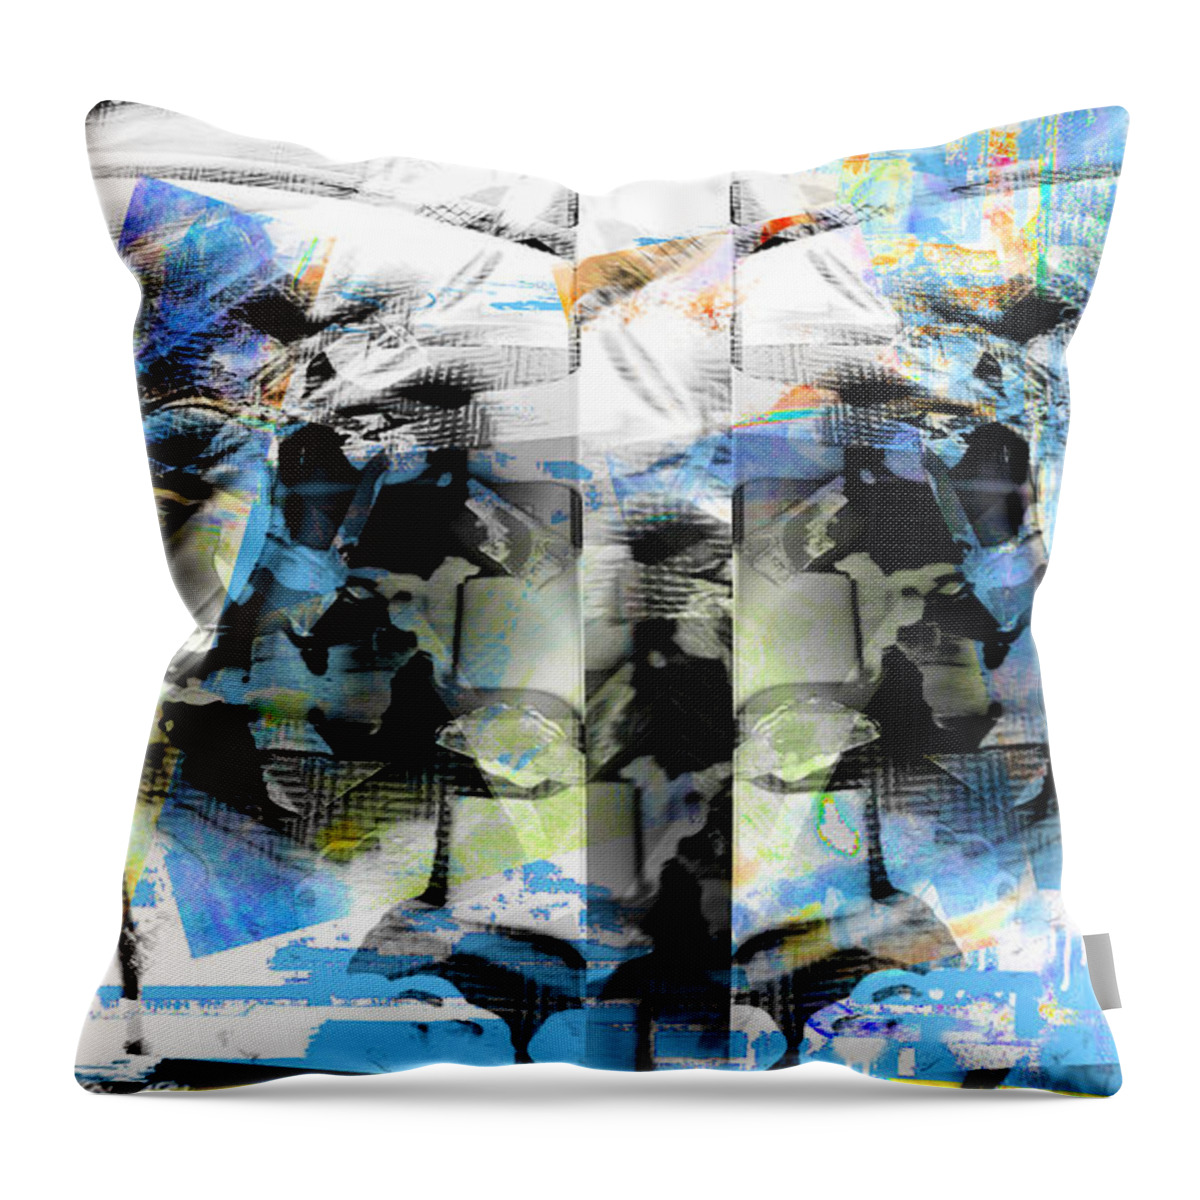 Sky Throw Pillow featuring the digital art Sky In Clouds by Art Di